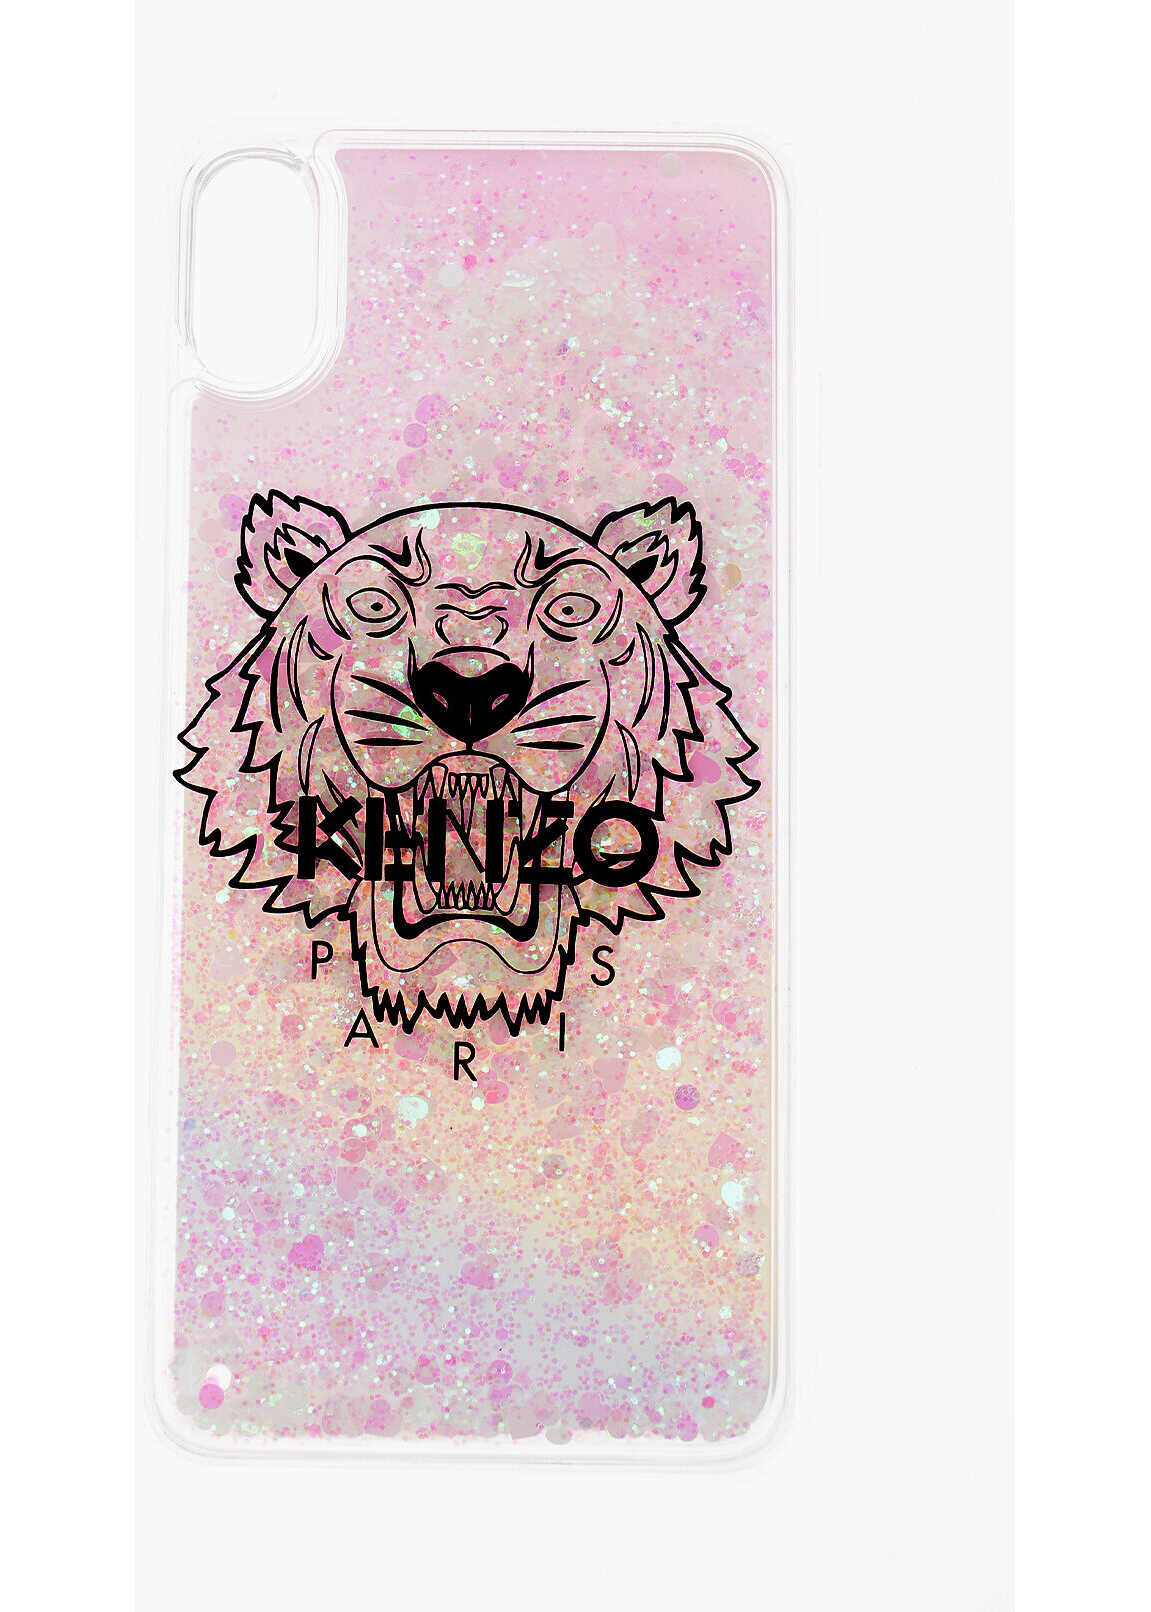 Kenzo Iphone Xs Max Hard Case With Flowing Liquid And Glitter Pink